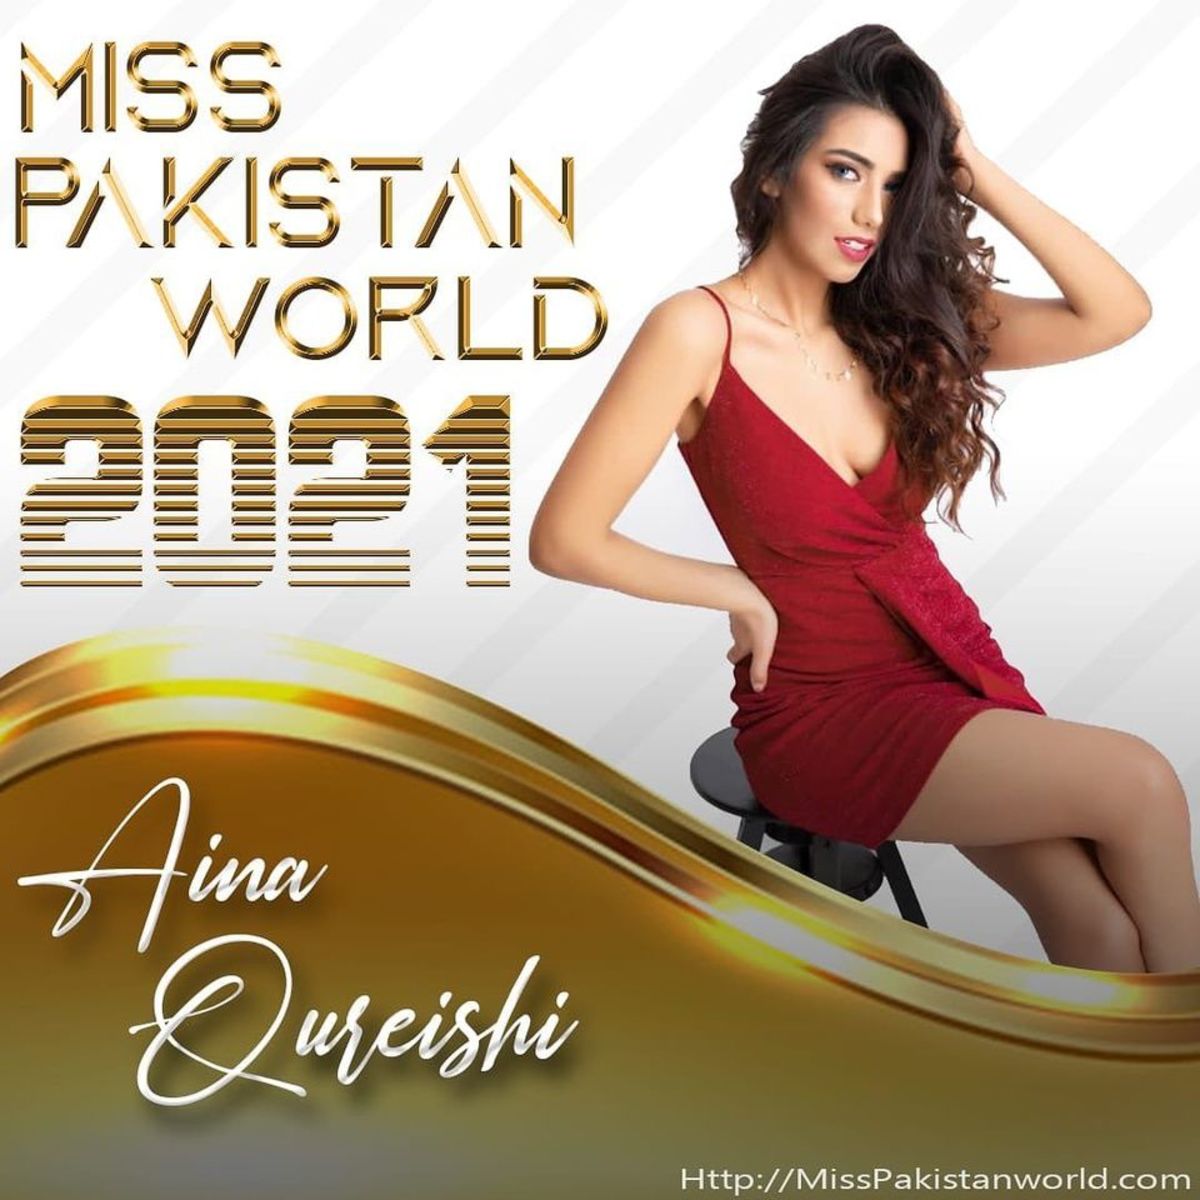 ramina-ashfique-beats-the-mullah-and-male-chauvinism-by-posing-in-a-bikini-and-becoming-miss-earth-pakistan